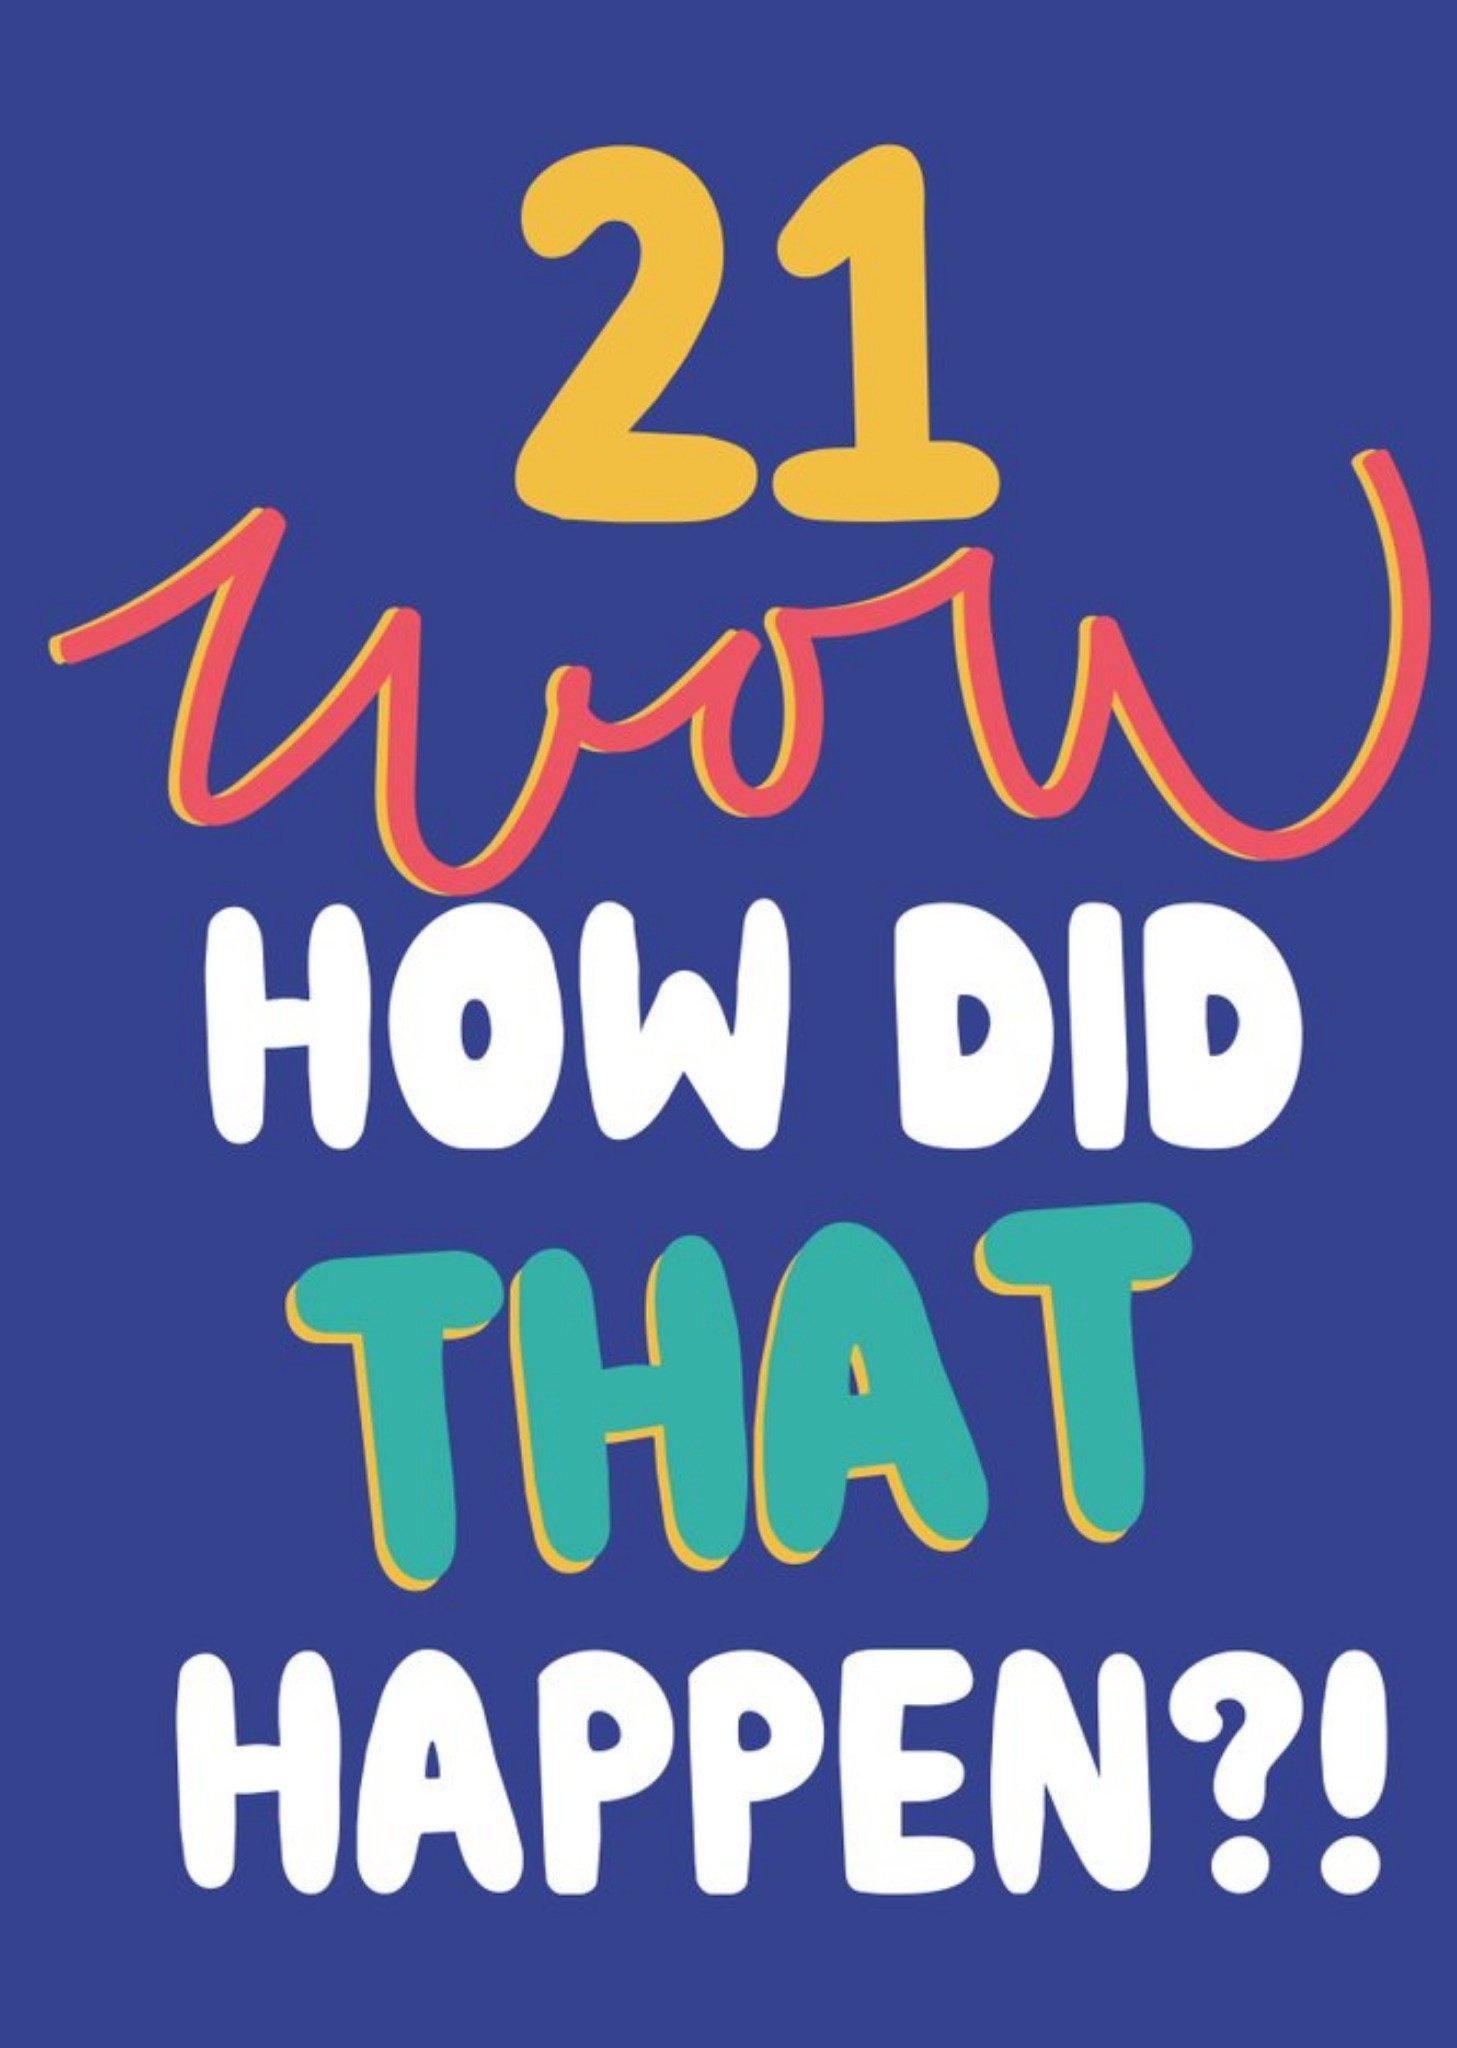 Moonpig 21 Wow How Did That Happen Bright Typographic Birthday Card Ecard